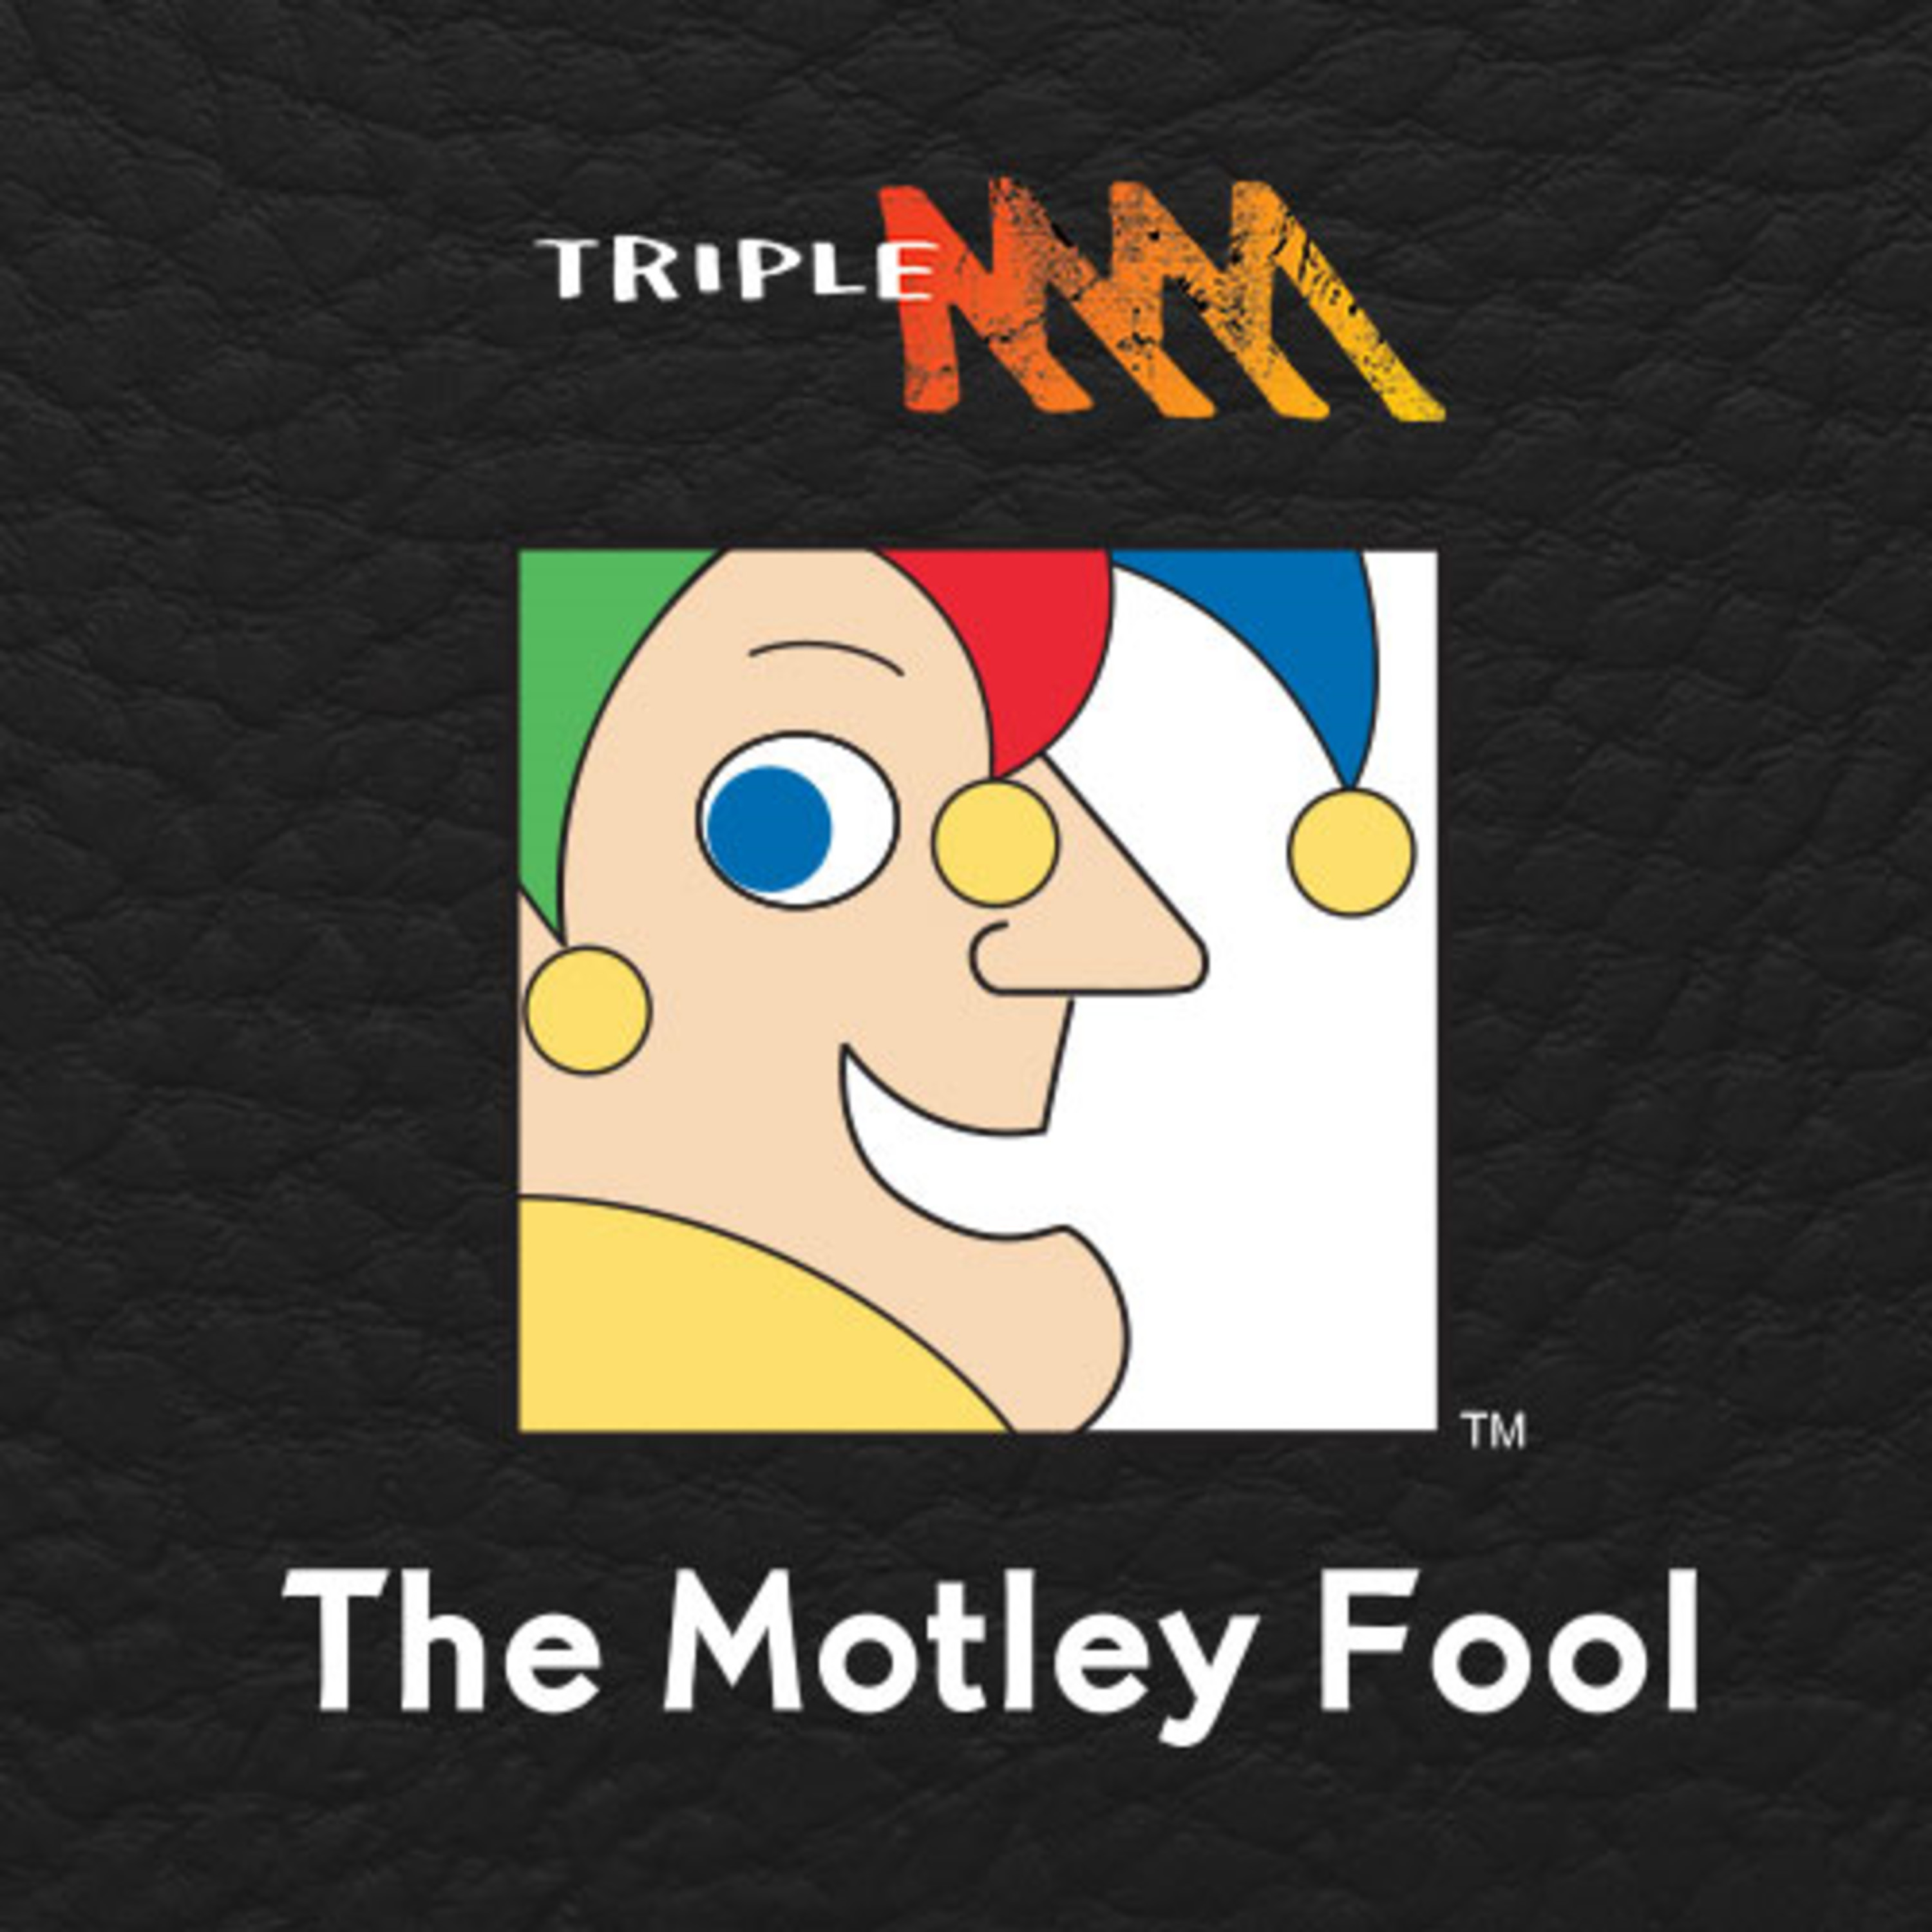 Free fund managing?, Superfunds, intrinsic values - Episode 114 August 10 - Triple M's Motley Fool Money